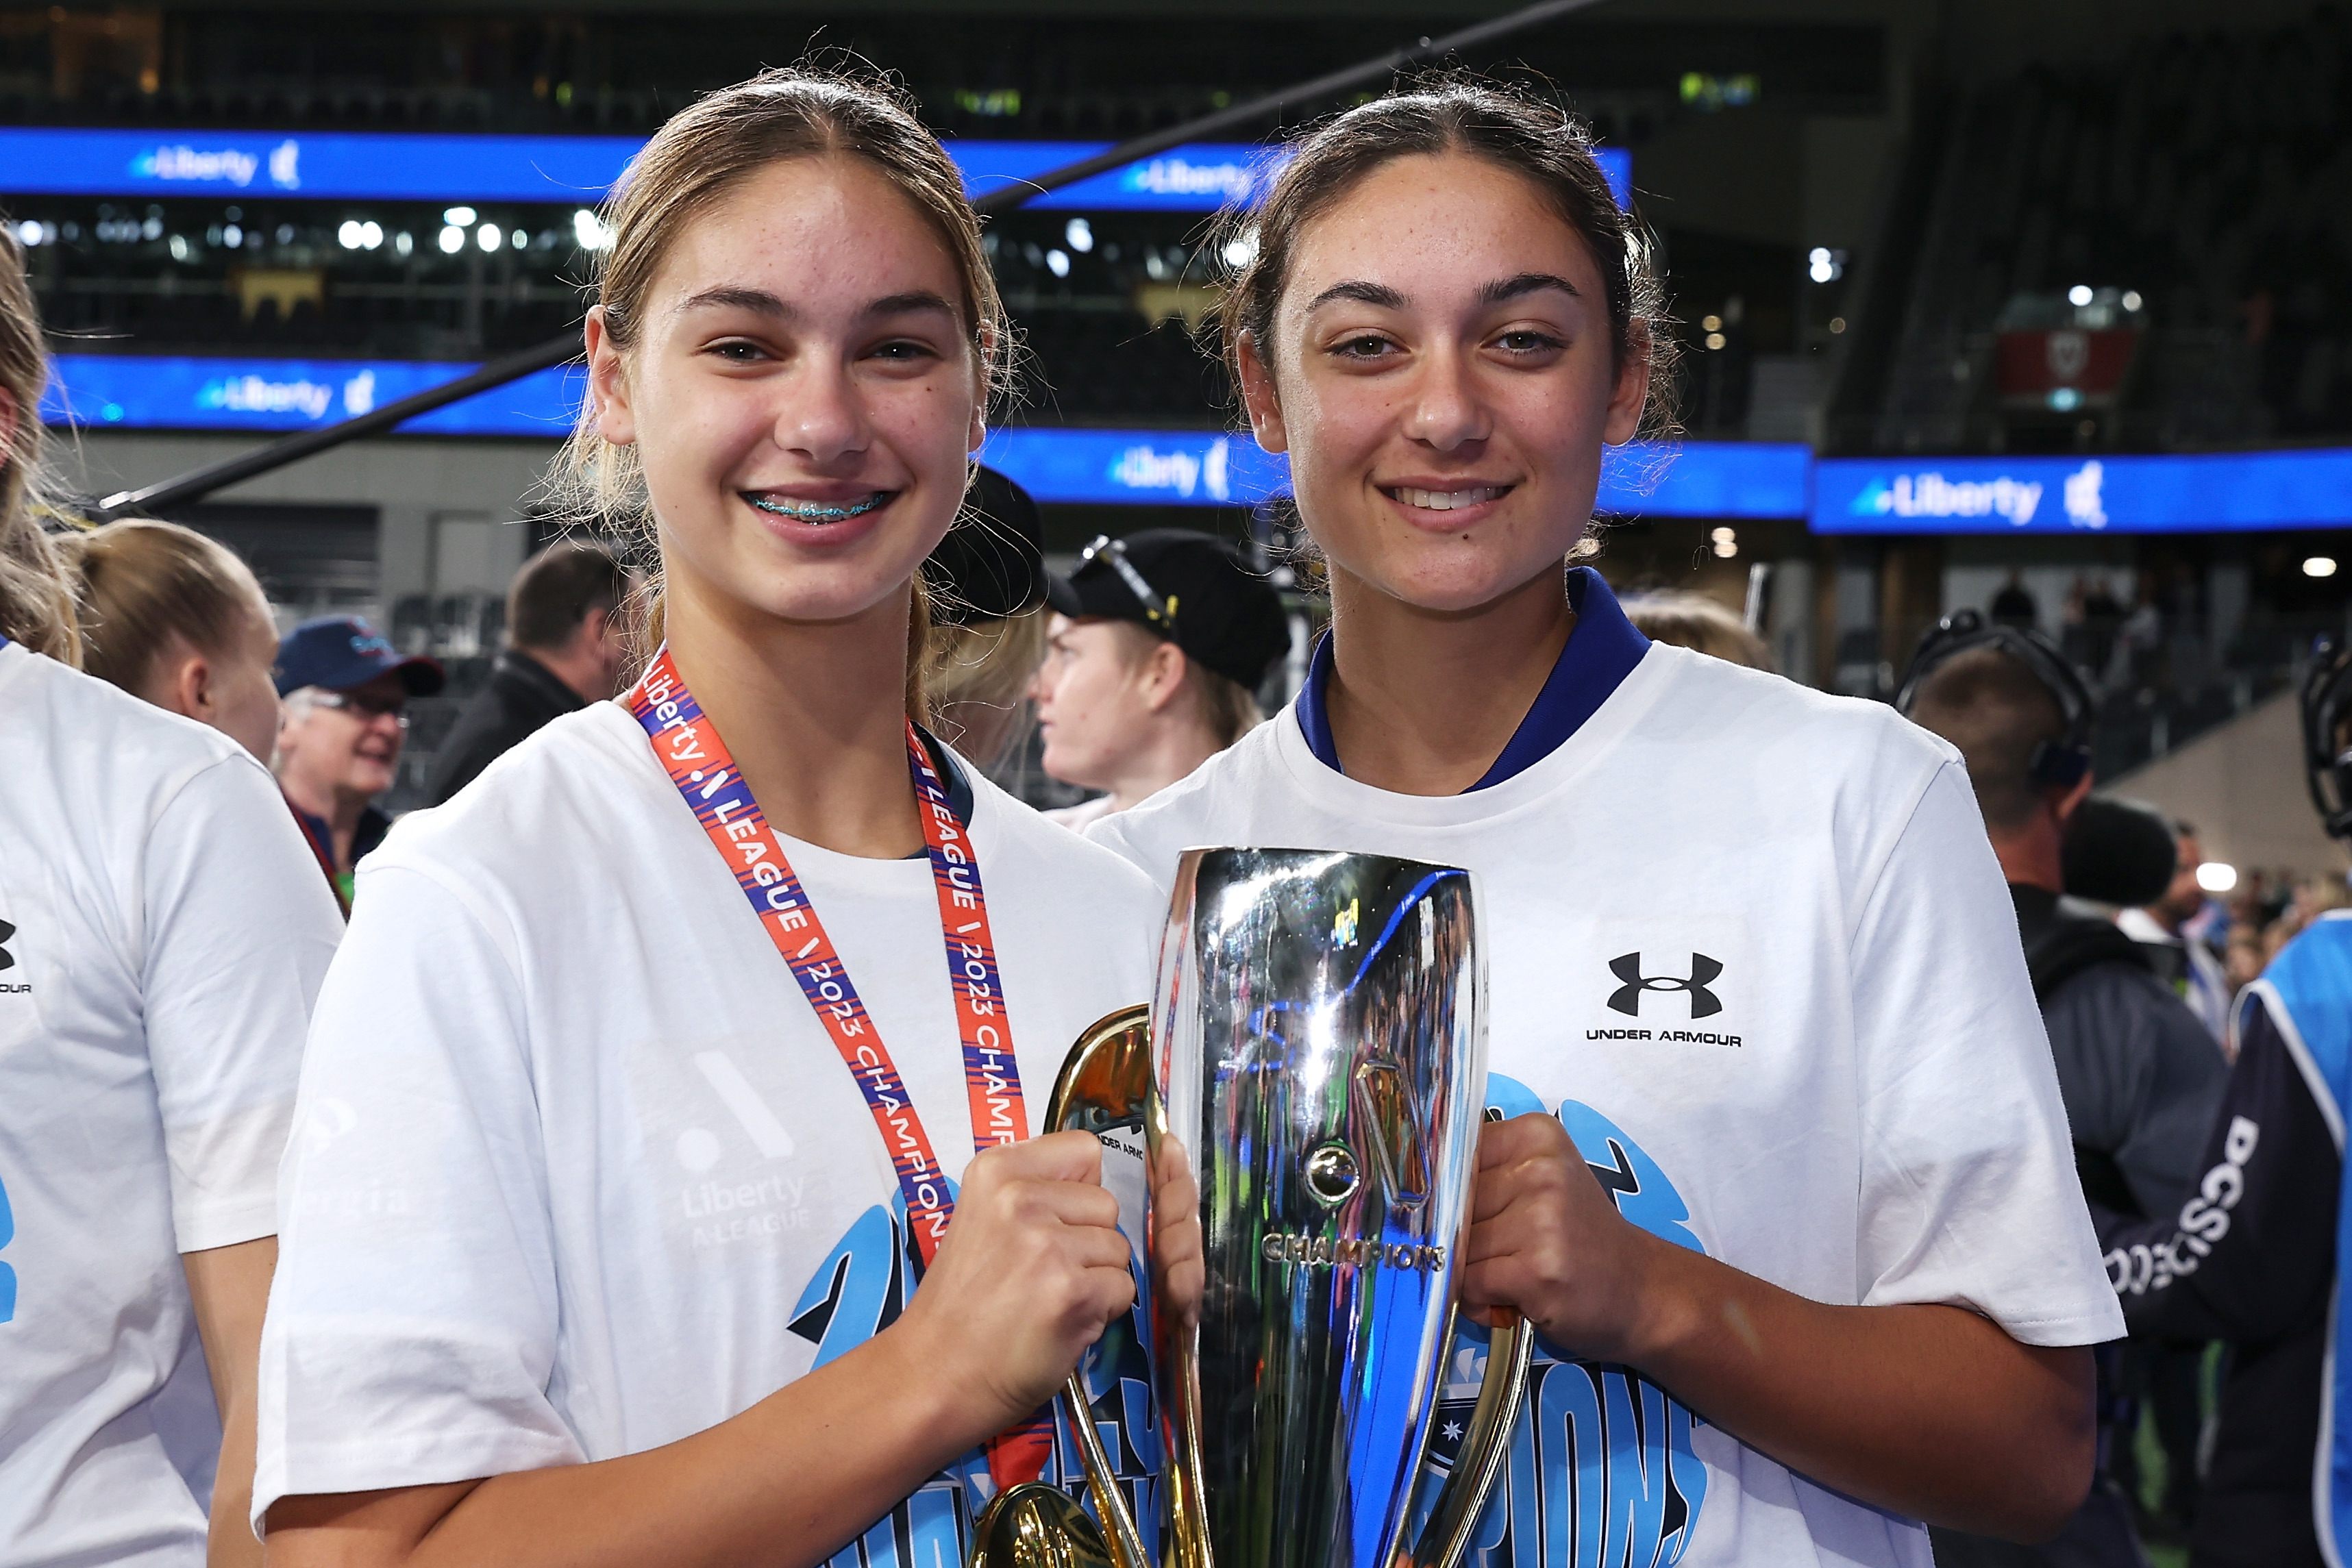 Sisters Indiana Dos Santos and Jynaya Dos Santos of Sydney FC pose with the A-League Women's championship trophy.